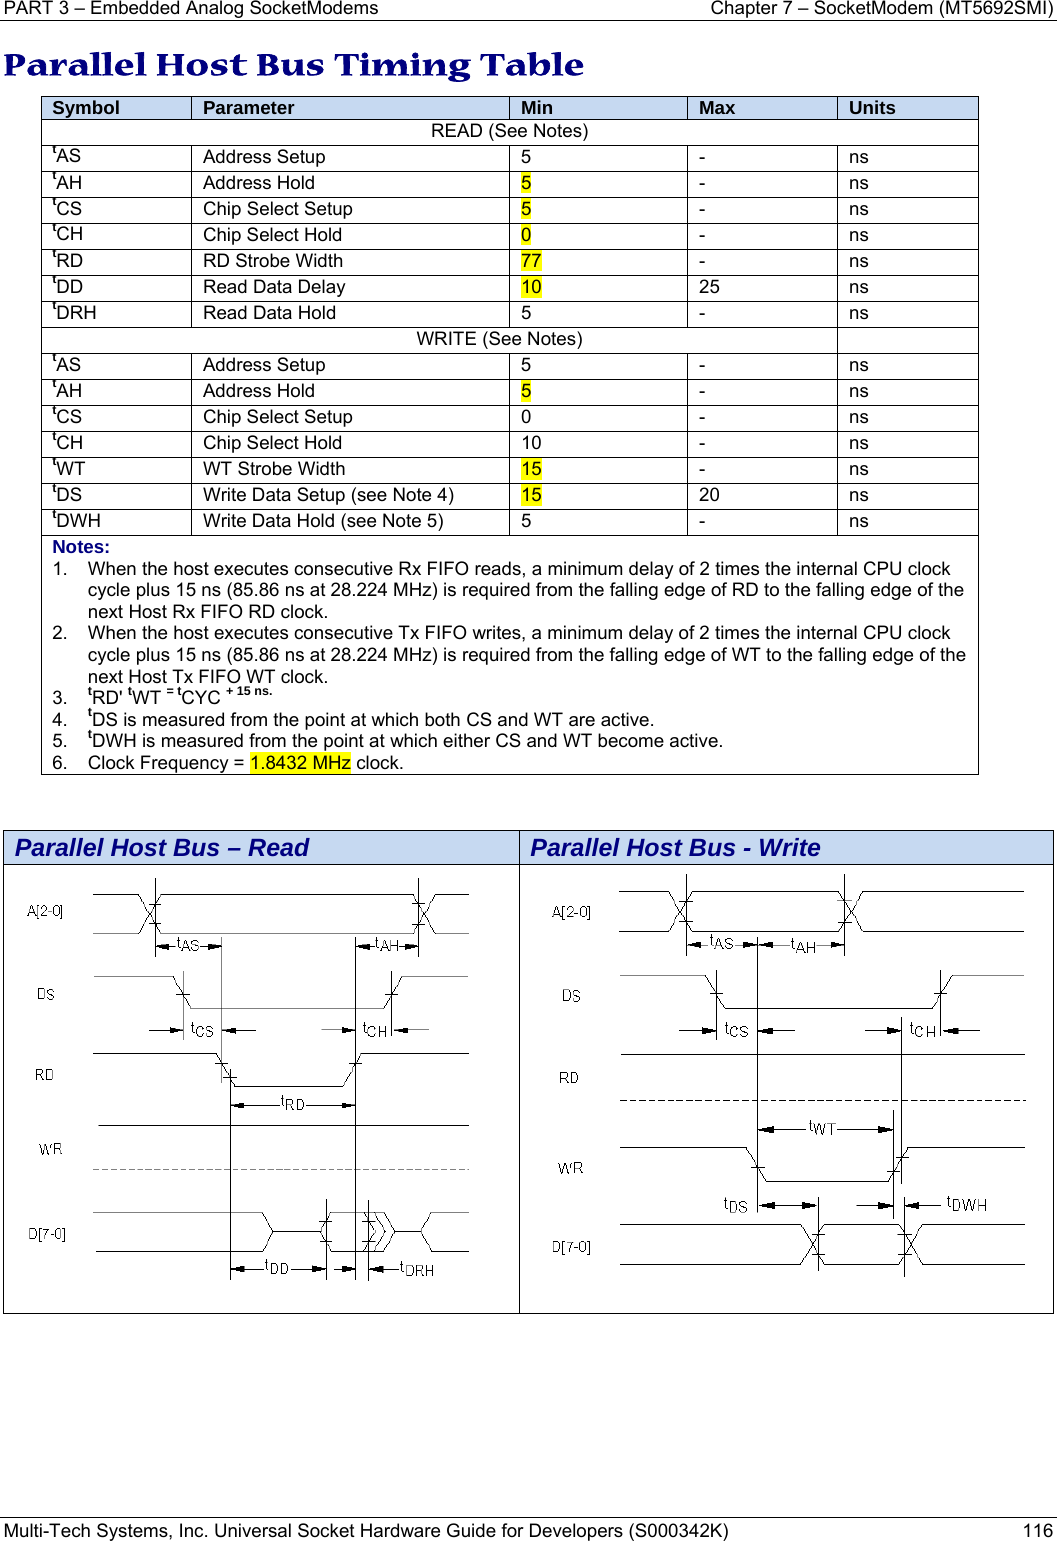 PART 3 – Embedded Analog SocketModems    Chapter 7 – SocketModem (MT5692SMI) Multi-Tech Systems, Inc. Universal Socket Hardware Guide for Developers (S000342K)  116  Parallel Host Bus Timing Table Symbol  Parameter Min Max Units READ (See Notes) tAS  Address Setup  5  -  ns tAH  Address Hold  5   -  ns tCS  Chip Select Setup  5 - ns tCH Chip Select Hold  0 - ns tRD RD Strobe Width  77 - ns tDD Read Data Delay  10 25 ns tDRH Read Data Hold  5  -  ns                        WRITE (See Notes)   tAS  Address Setup  5  -  ns tAH  Address Hold  5 - ns tCS  Chip Select Setup  0  -  ns tCH Chip Select Hold  10  -  ns tWT WT Strobe Width  15 - ns tDS Write Data Setup (see Note 4)  15 20 ns tDWH Write Data Hold (see Note 5)  5  -  ns Notes: 1.  When the host executes consecutive Rx FIFO reads, a minimum delay of 2 times the internal CPU clock cycle plus 15 ns (85.86 ns at 28.224 MHz) is required from the falling edge of RD to the falling edge of the next Host Rx FIFO RD clock. 2.  When the host executes consecutive Tx FIFO writes, a minimum delay of 2 times the internal CPU clock cycle plus 15 ns (85.86 ns at 28.224 MHz) is required from the falling edge of WT to the falling edge of the next Host Tx FIFO WT clock. 3.  tRD&apos; tWT = tCYC + 15 ns. 4.  tDS is measured from the point at which both CS and WT are active. 5.  tDWH is measured from the point at which either CS and WT become active. 6.  Clock Frequency = 1.8432 MHz clock.    Parallel Host Bus – Read  Parallel Host Bus - Write       